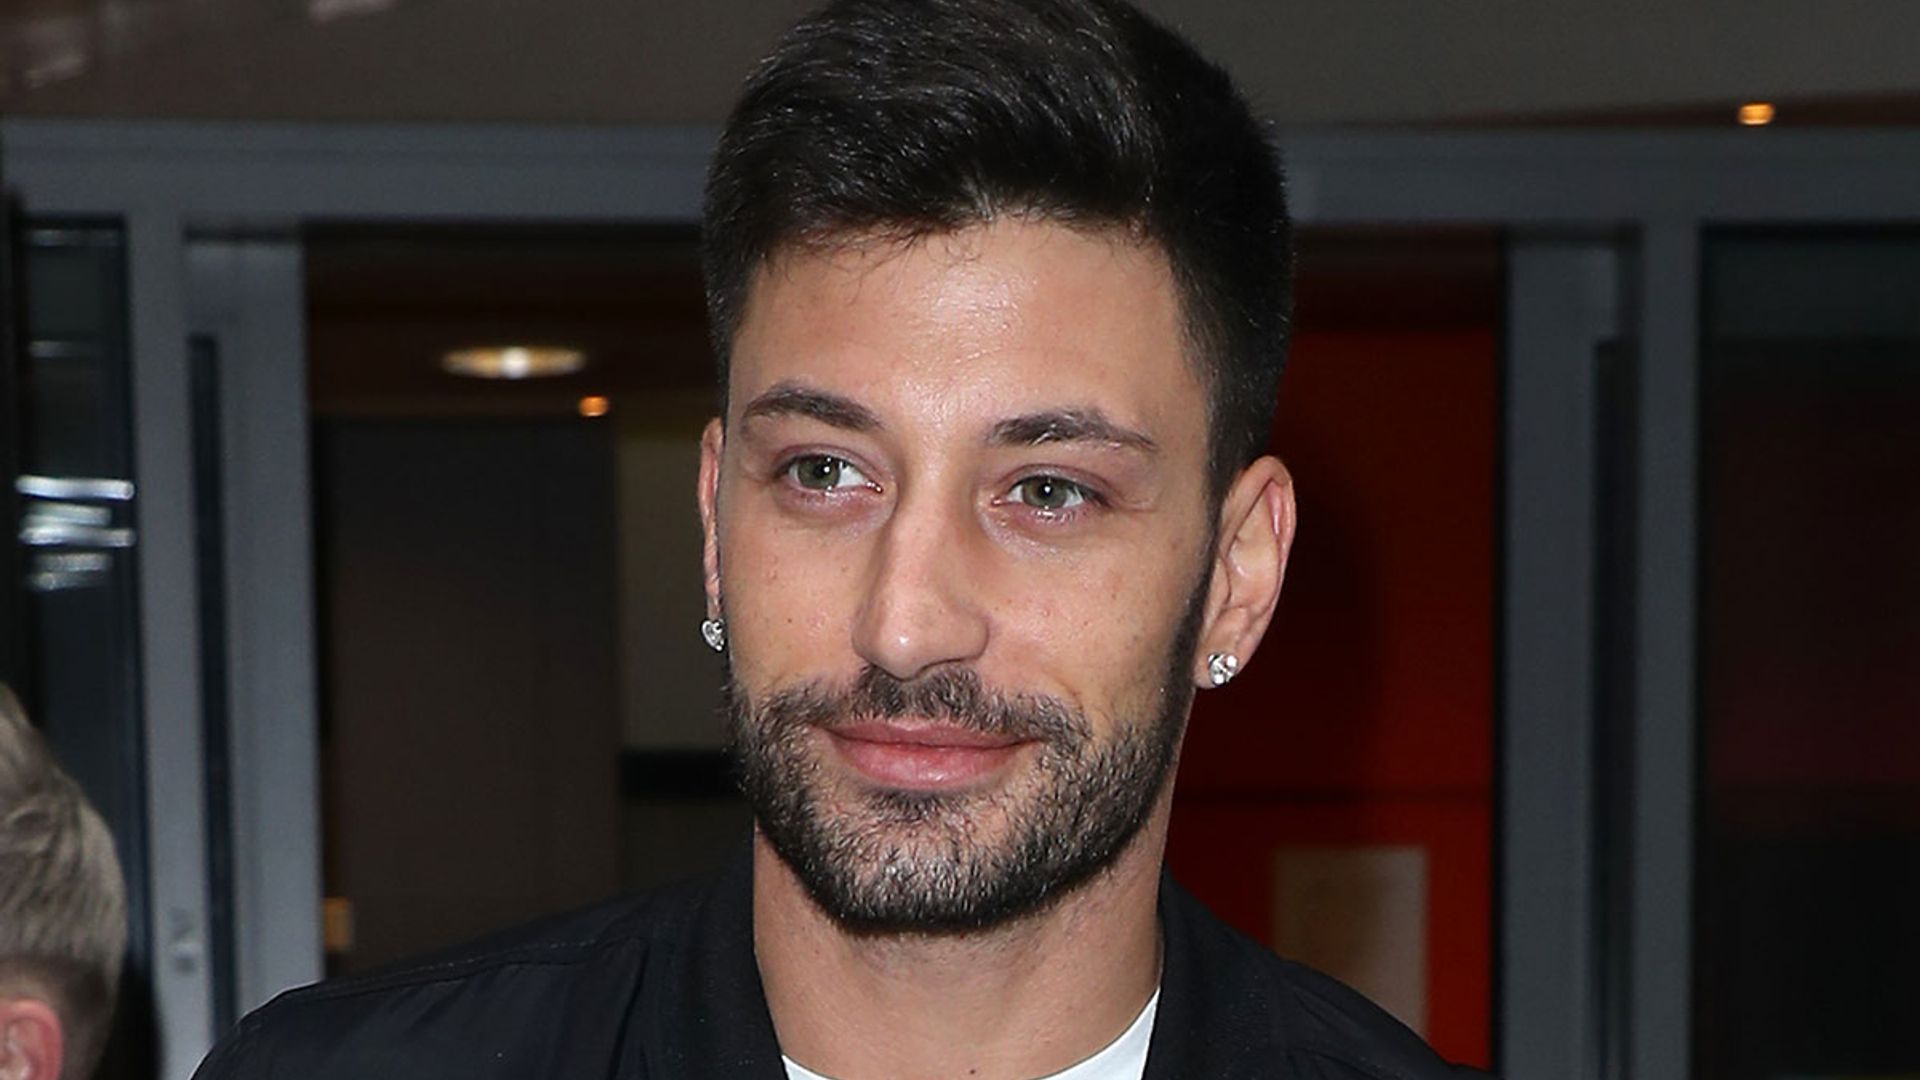 Who is Strictly Come Dancing's Giovanni Pernice dating?